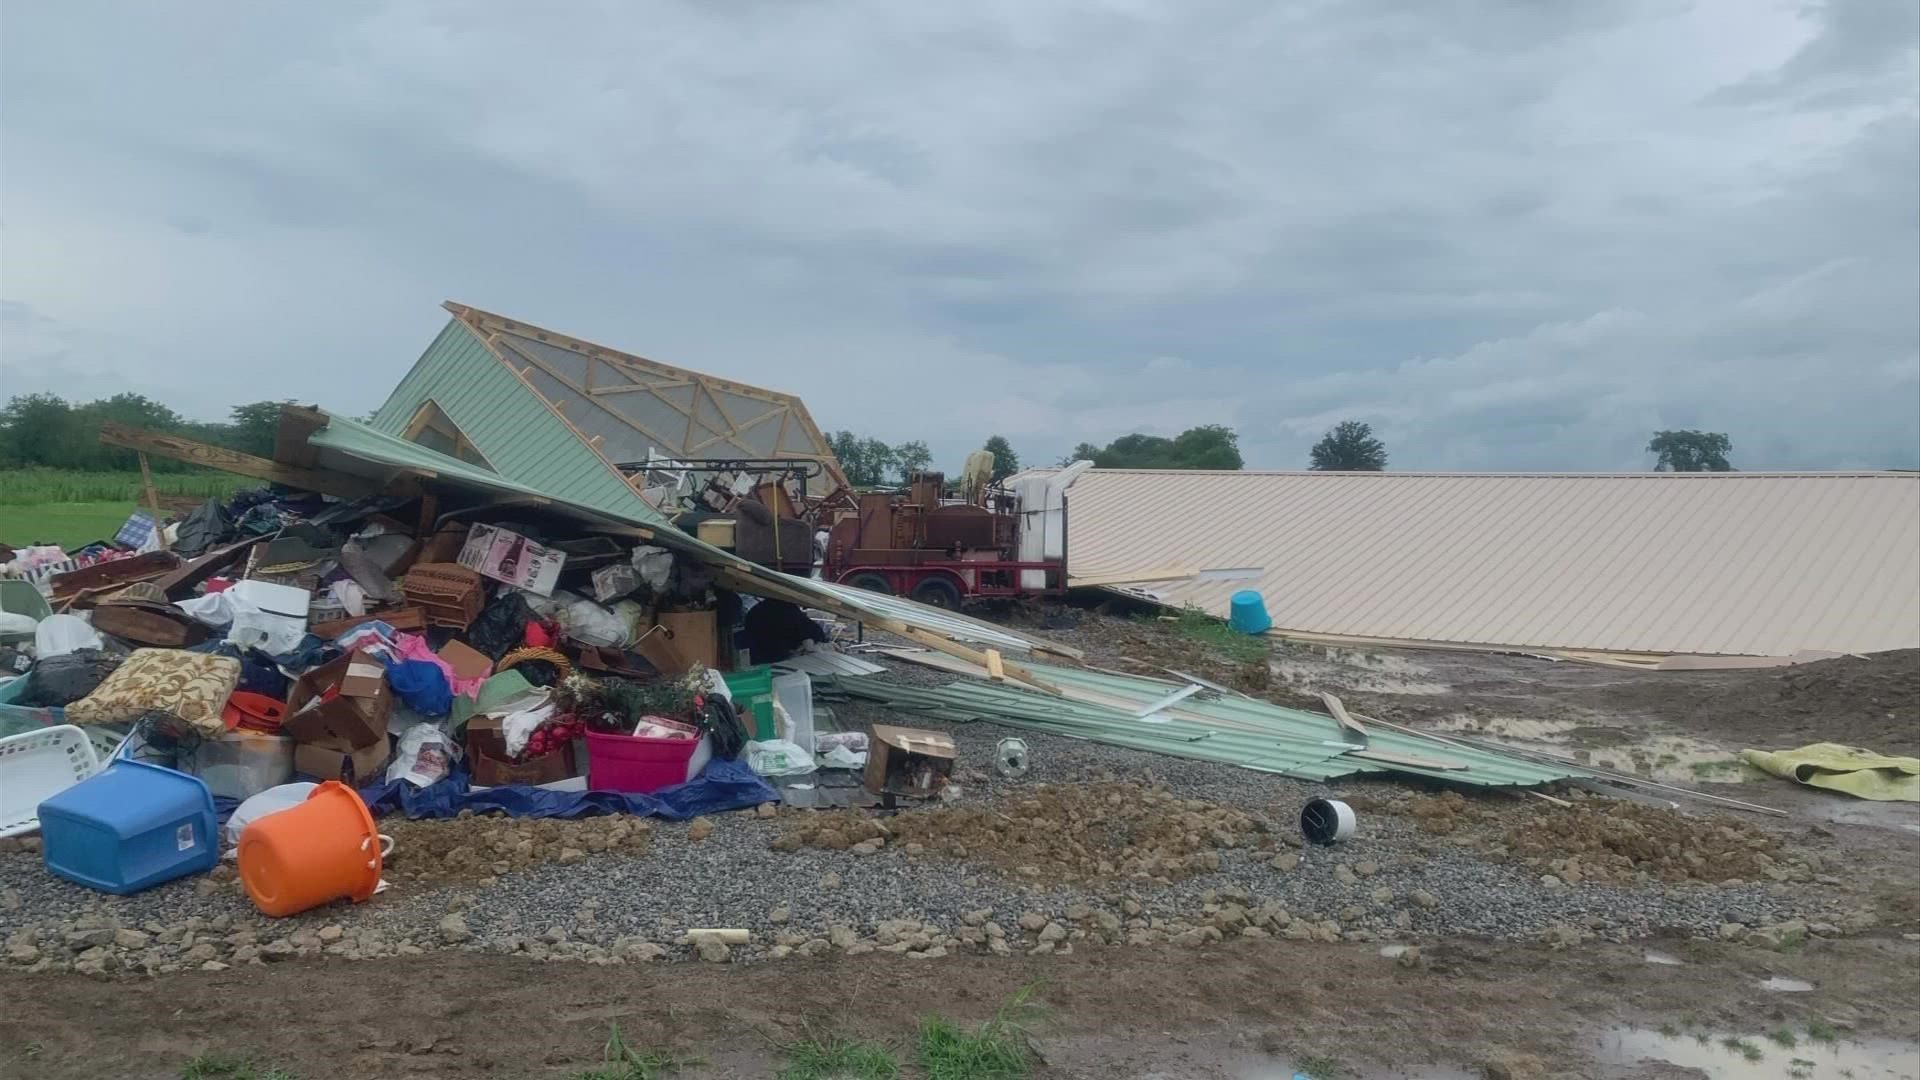 The Pickaway County Sheriff's Office said four people were treated for injuries due to the storm.